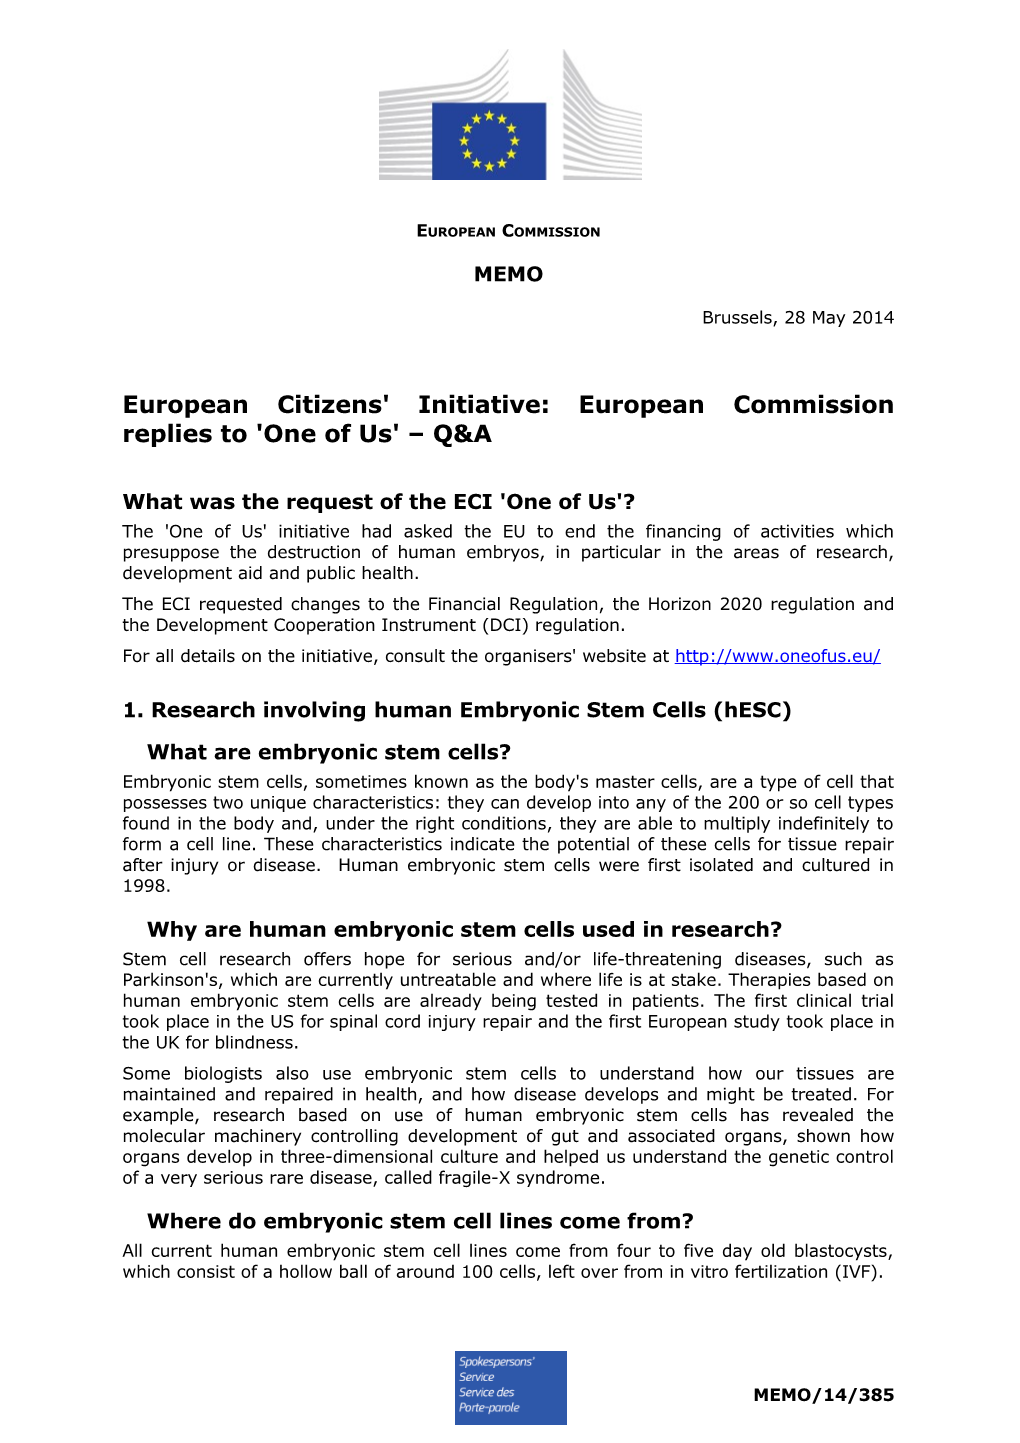 European Citizens' Initiative: European Commission Replies to 'One of Us' Q&A